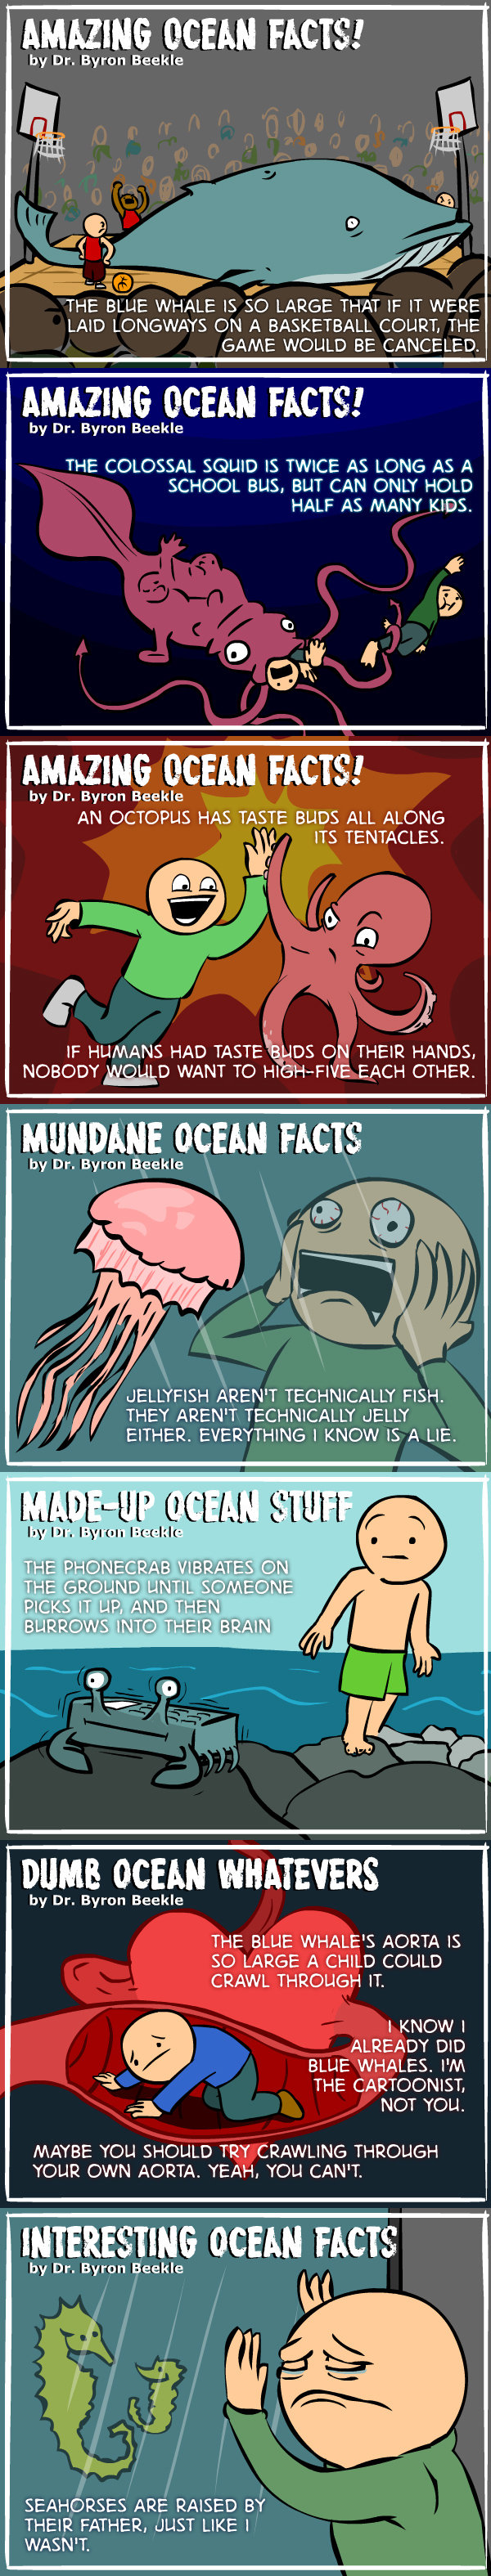 Real Ocean Facts. Broaden your minds!